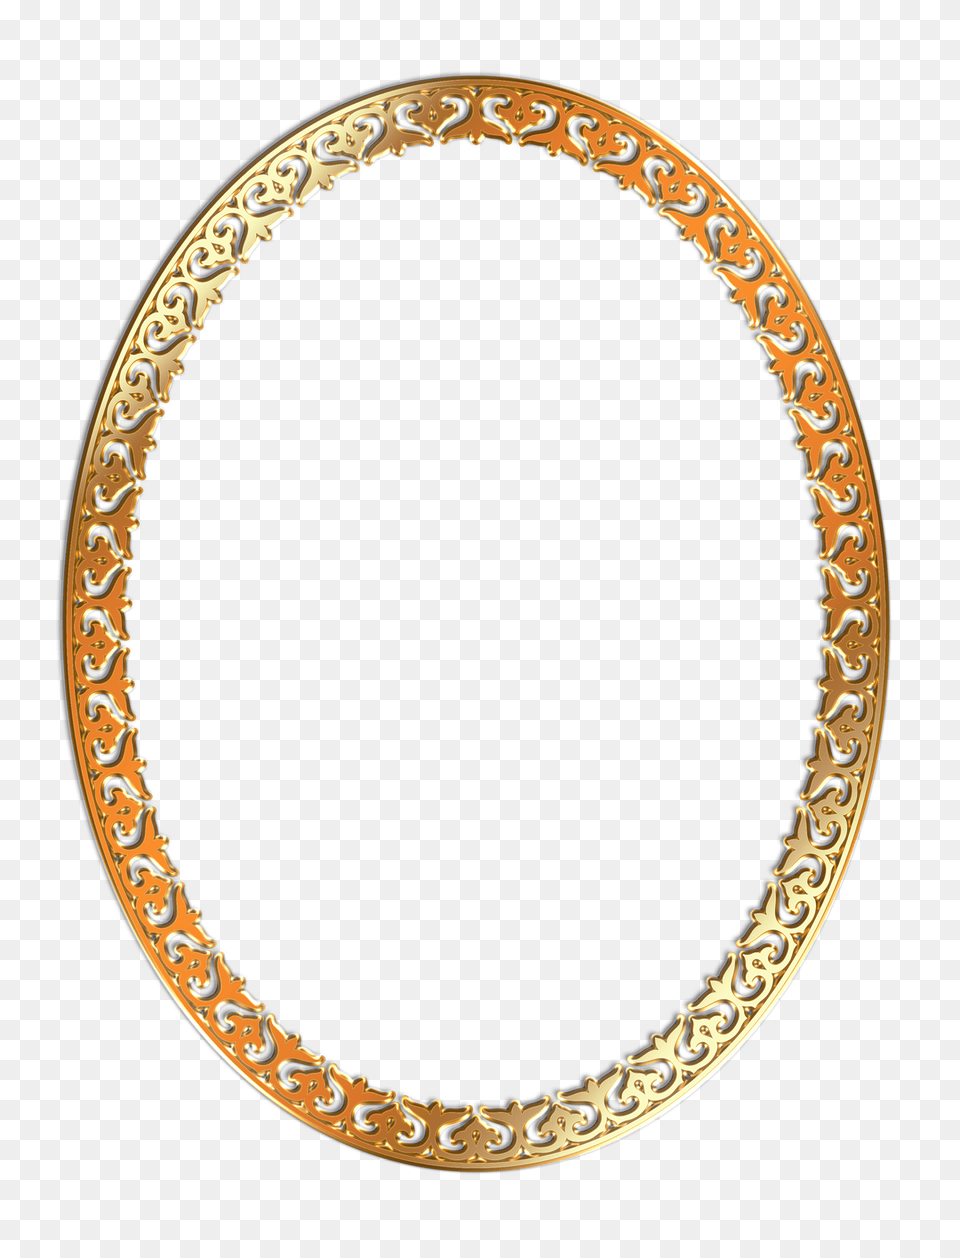 Pngpix Com Golden Photo Frame Transparent Image, Oval, Photography, Accessories Free Png Download